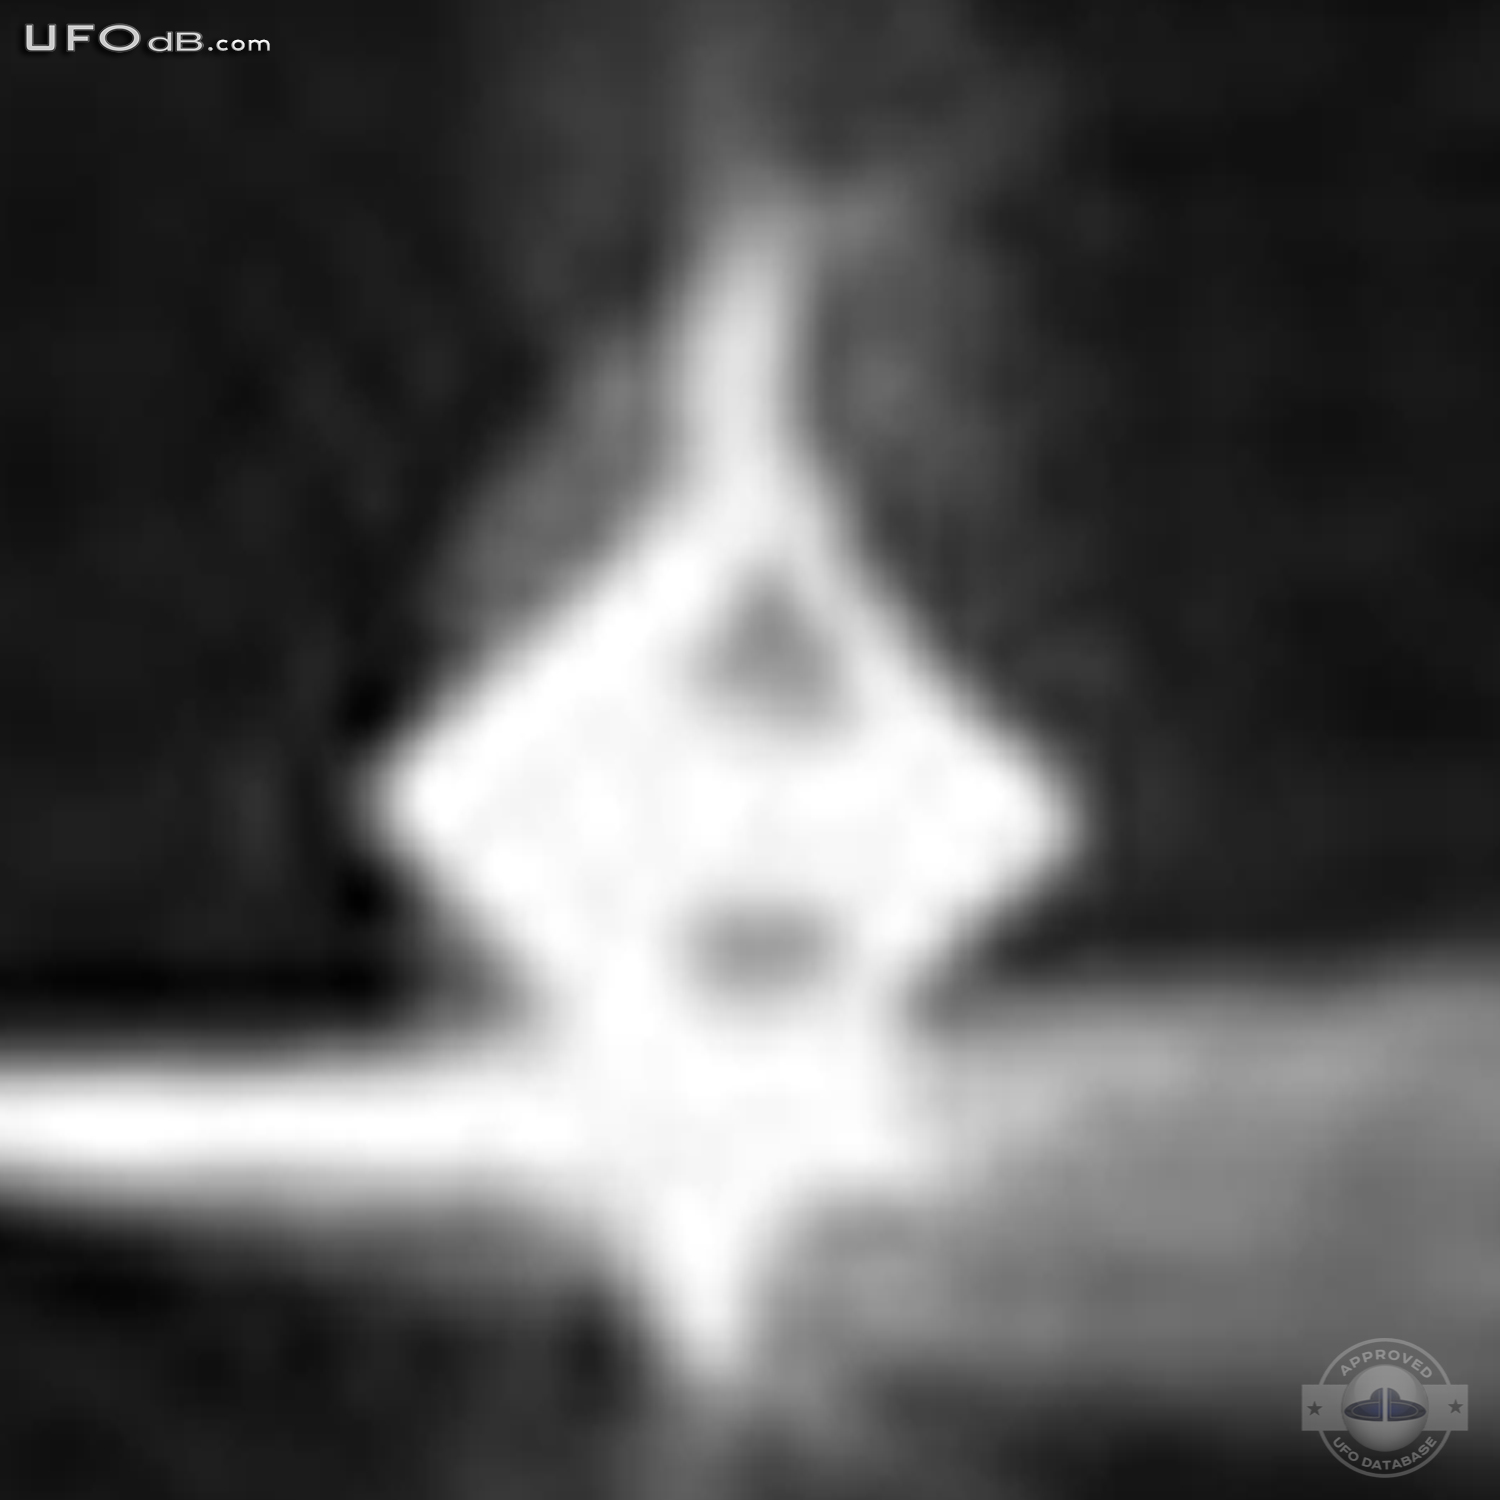 Santa Cesarea Terme floating UFO caught on Cam | Italy | May 17 2011 UFO Picture #295-6